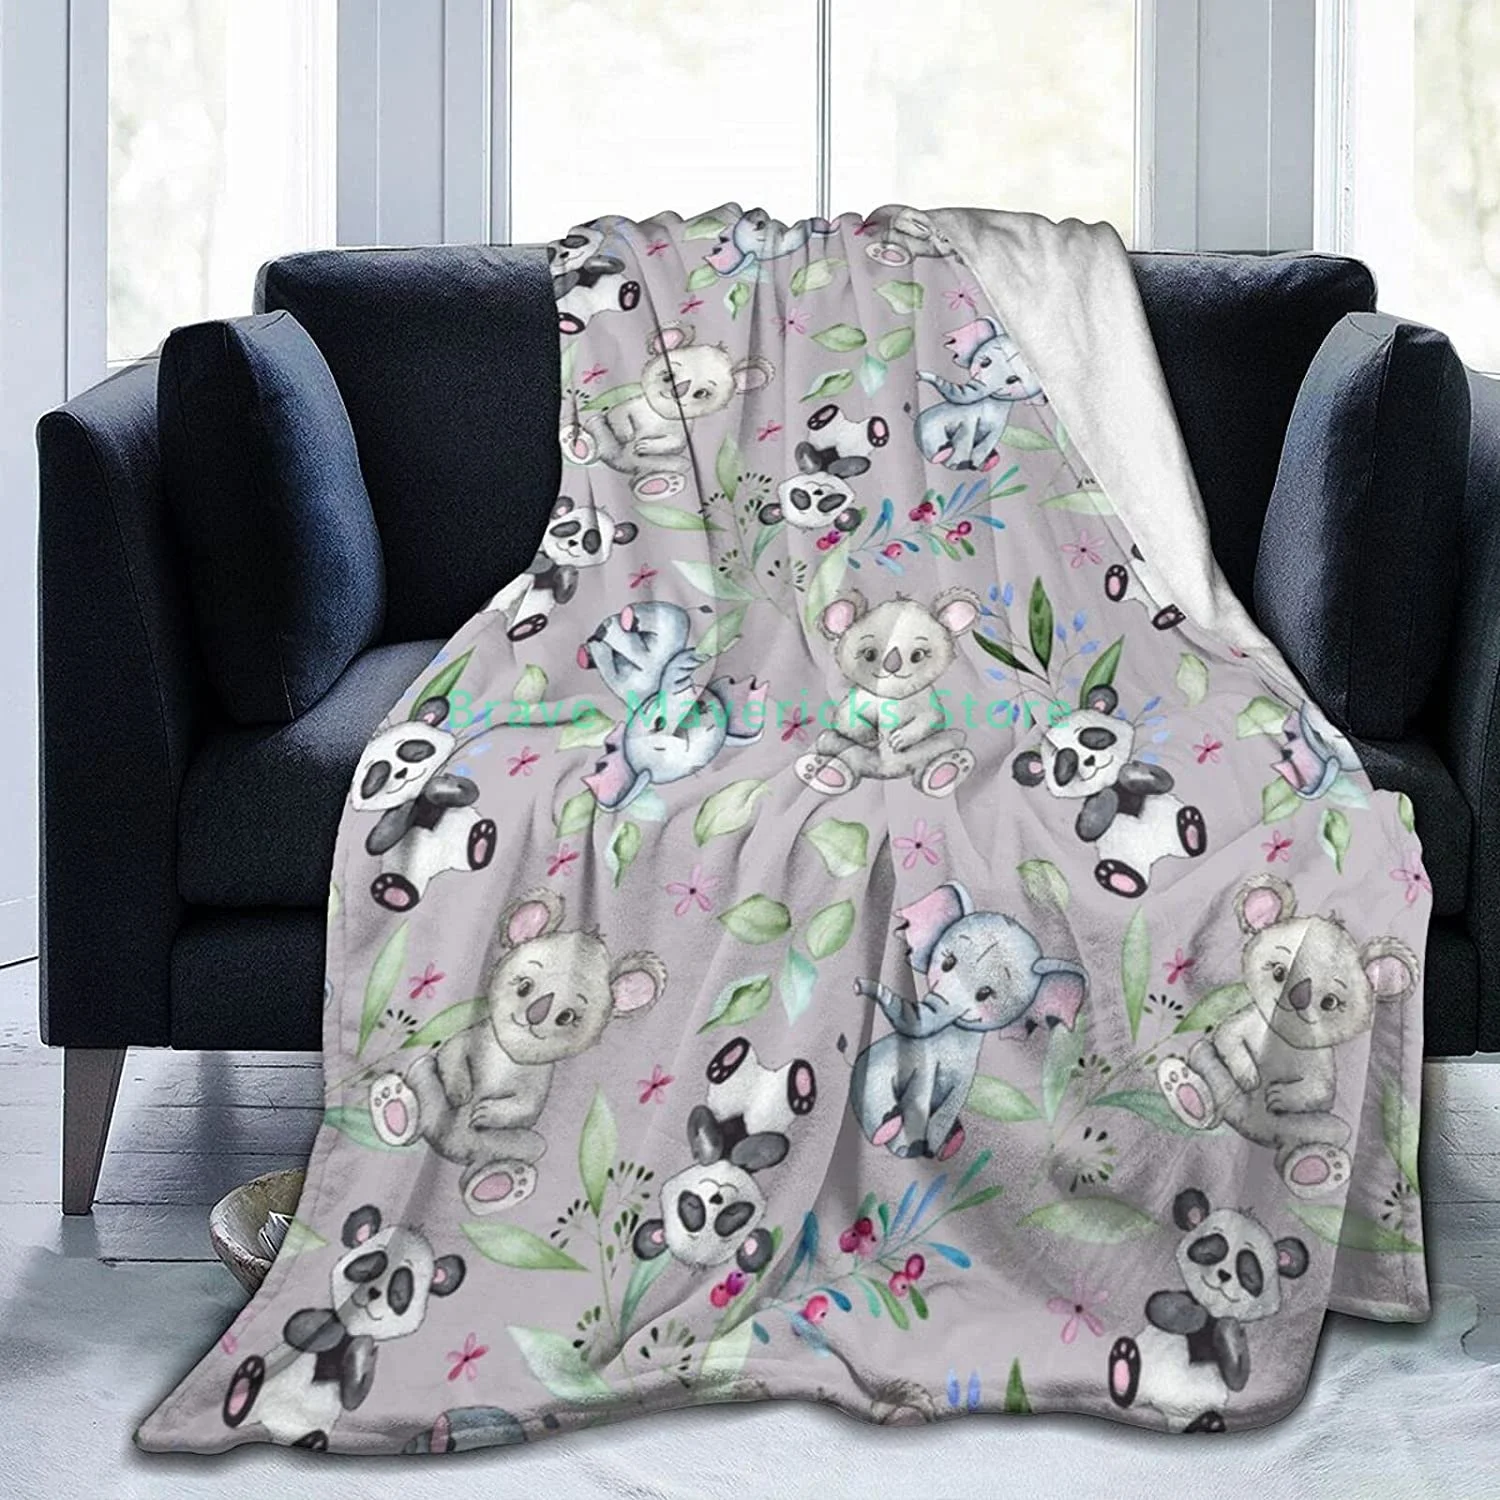 

Watercolor Cute Elephant Panda Fleece Flannel Throw Blankets for Couch Bed Sofa Car,Cozy Soft Blanket Throw for Kids Women Adult